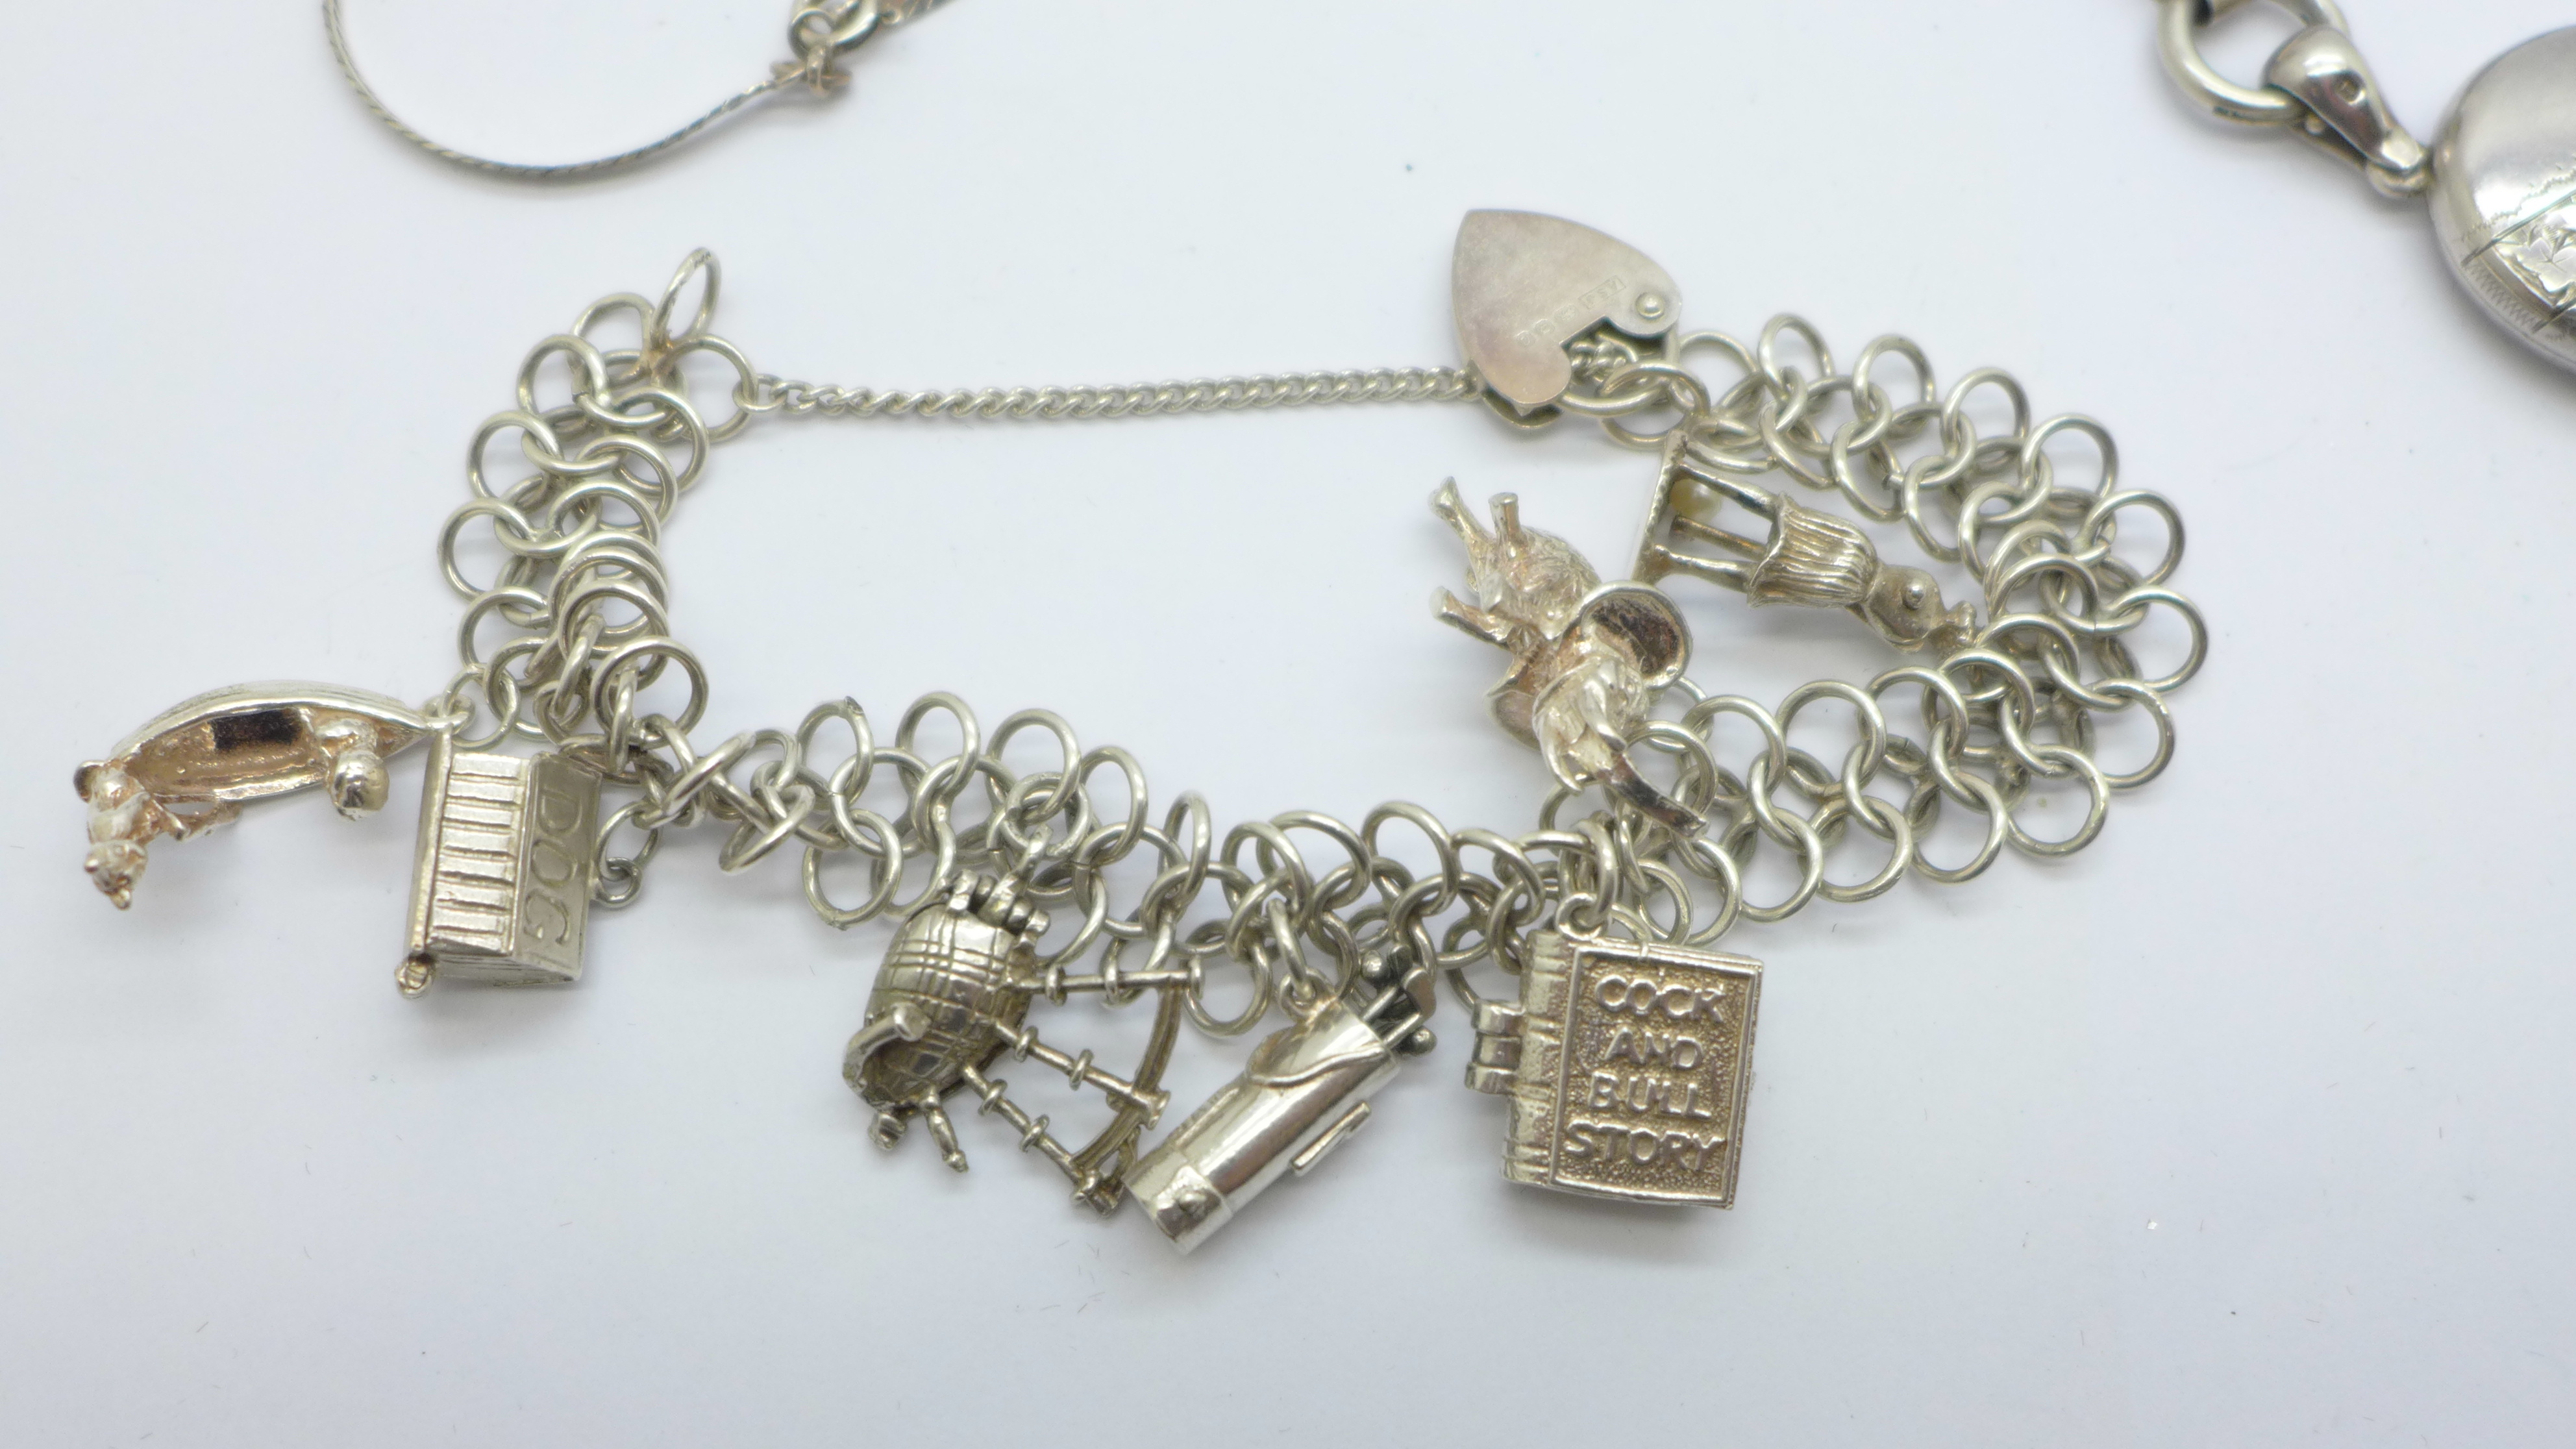 A collection of silver jewellery including a bangle, charm bracelet, locket on chain and marcasite - Image 3 of 4